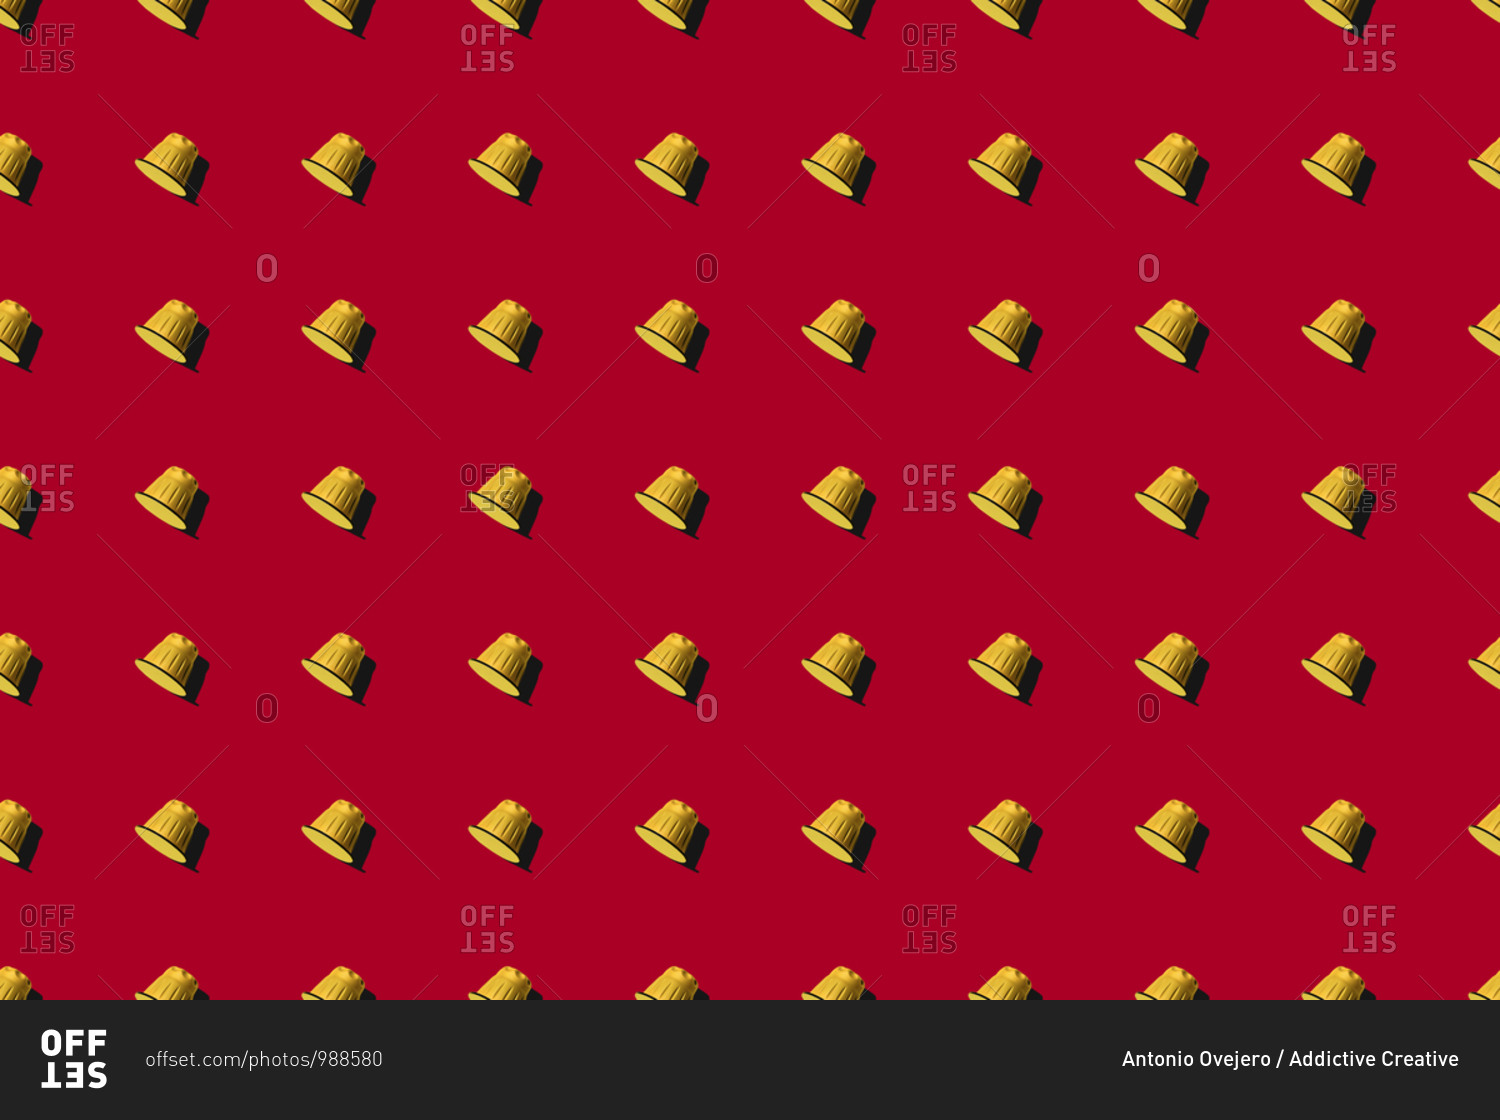 Top view of yellow coffee pods placed in even rows as seamless pattern on red background